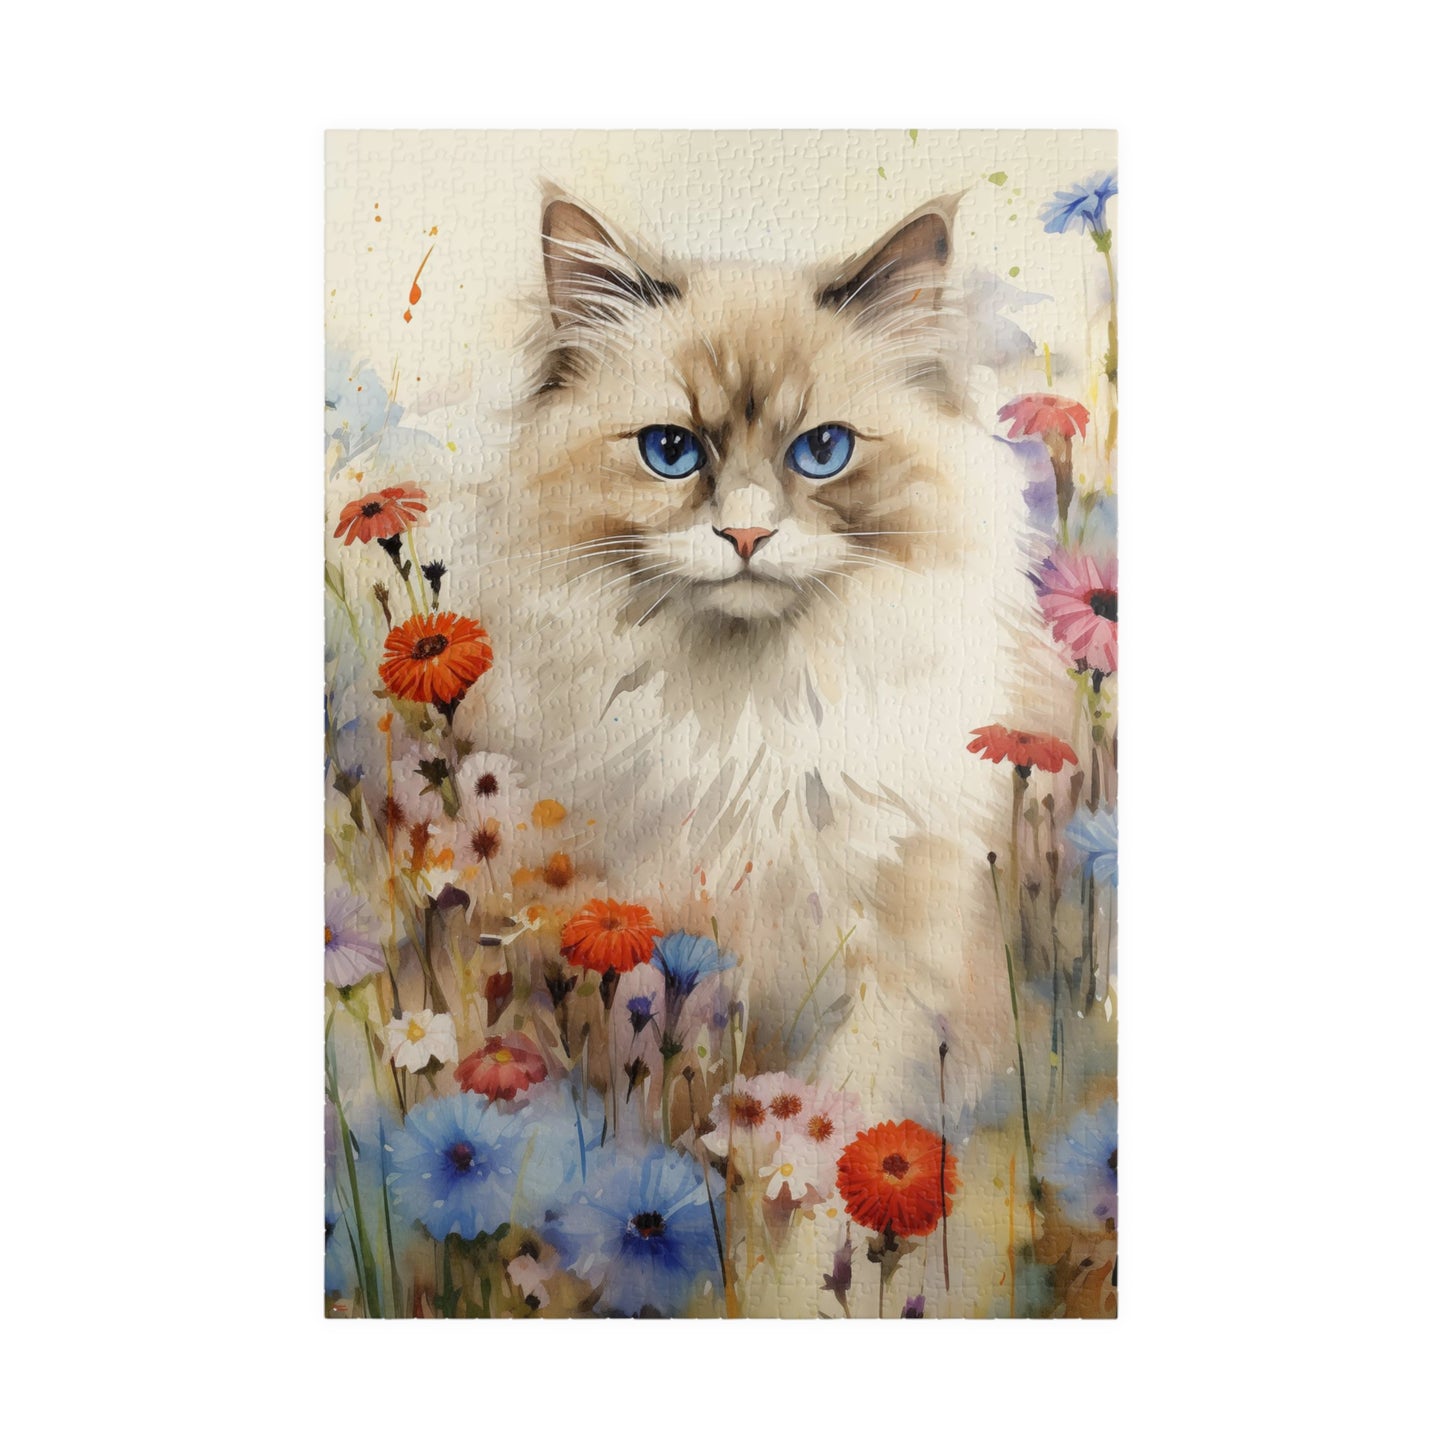 Ragdoll Cat in Wildflowers Watercolor Puzzle, 100% Chipboard, 110-1014 Pieces, Glossy Laminated Finish Feline Pussycat Kitten Family Pet Jig Saw Animals Girls Women Lady